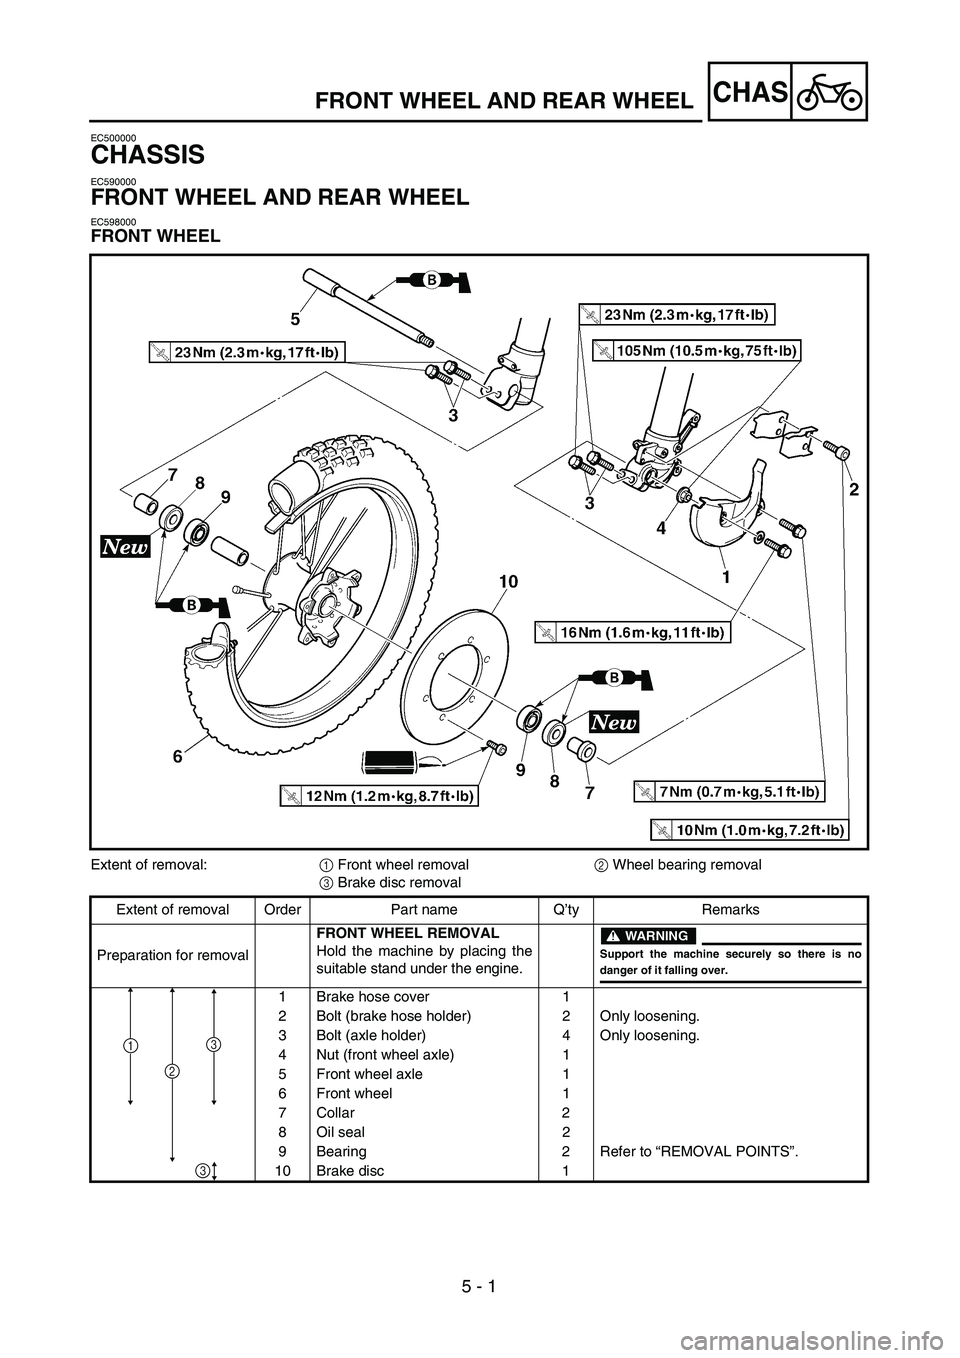 YAMAHA YZ250F 2002  Notices Demploi (in French)  
5 - 1
CHAS
 
EC500000 
CHASSIS 
EC590000 
FRONT WHEEL AND REAR WHEEL 
EC598000 
FRONT WHEEL 
FRONT WHEEL AND REAR WHEEL 
Extent of removal:  
1  
 Front wheel removal  
2  
 Wheel bearing removal  
